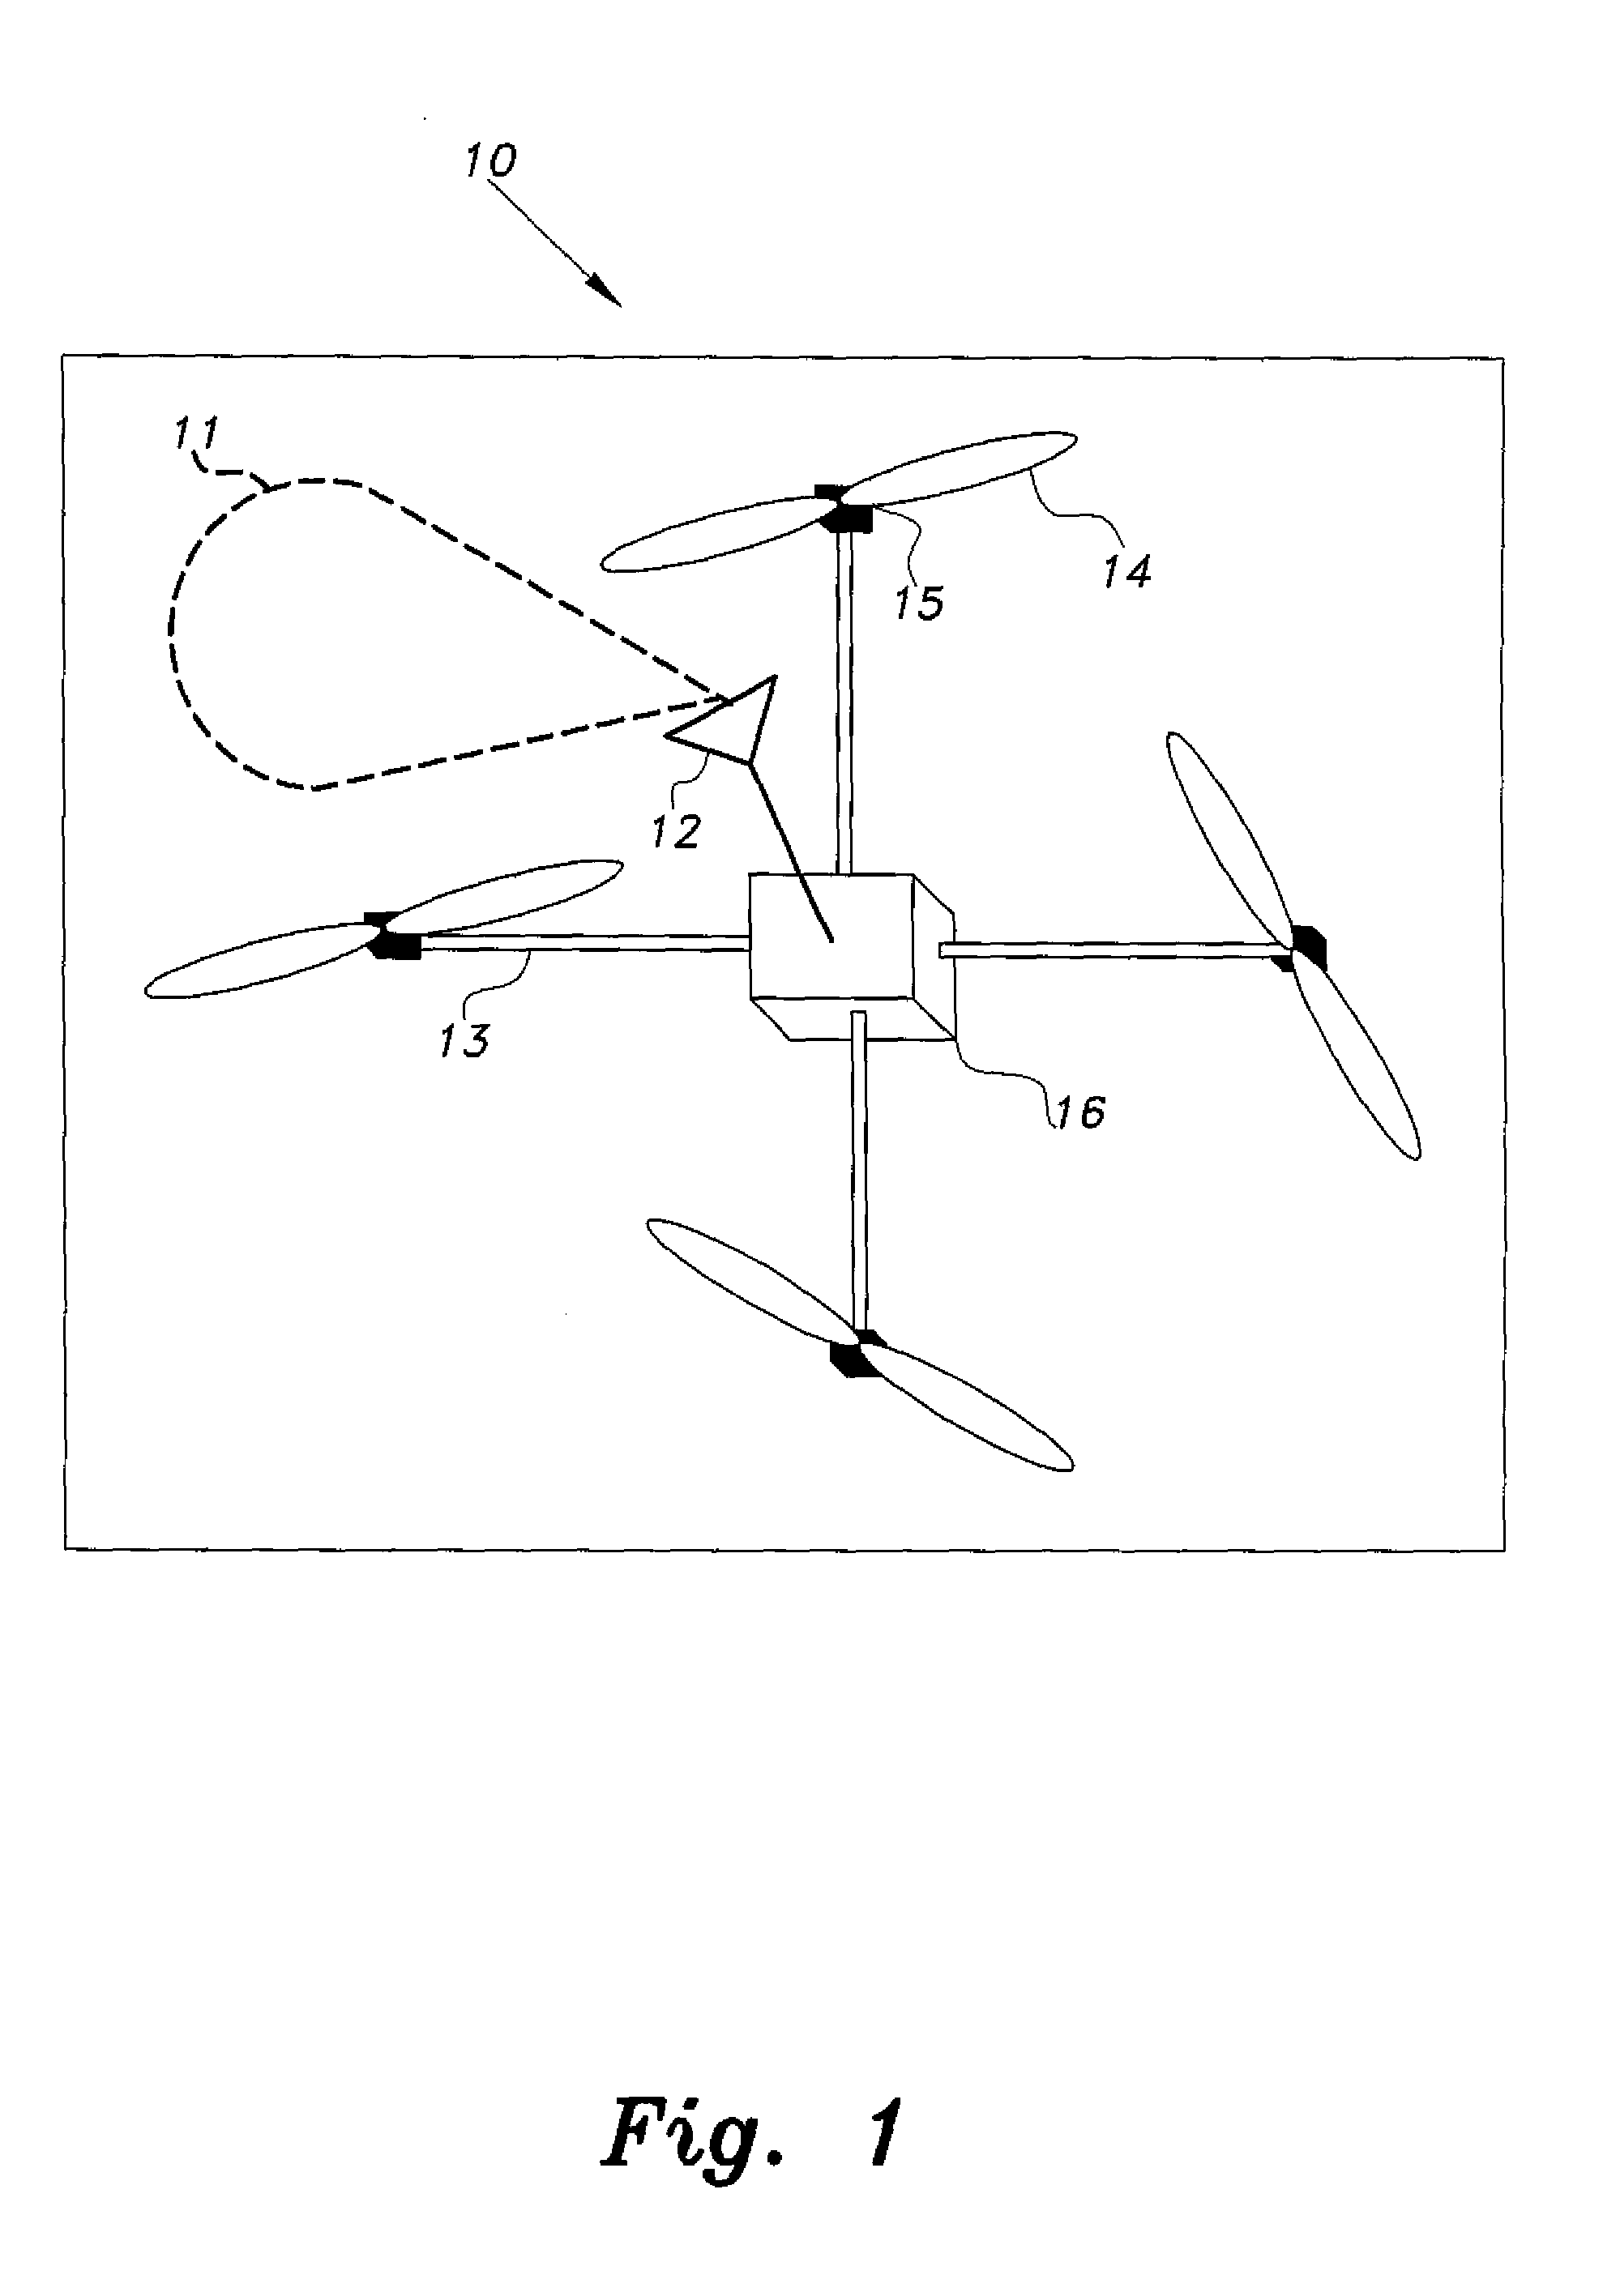 Single-antenna direction finding system for multi-rotor platforms